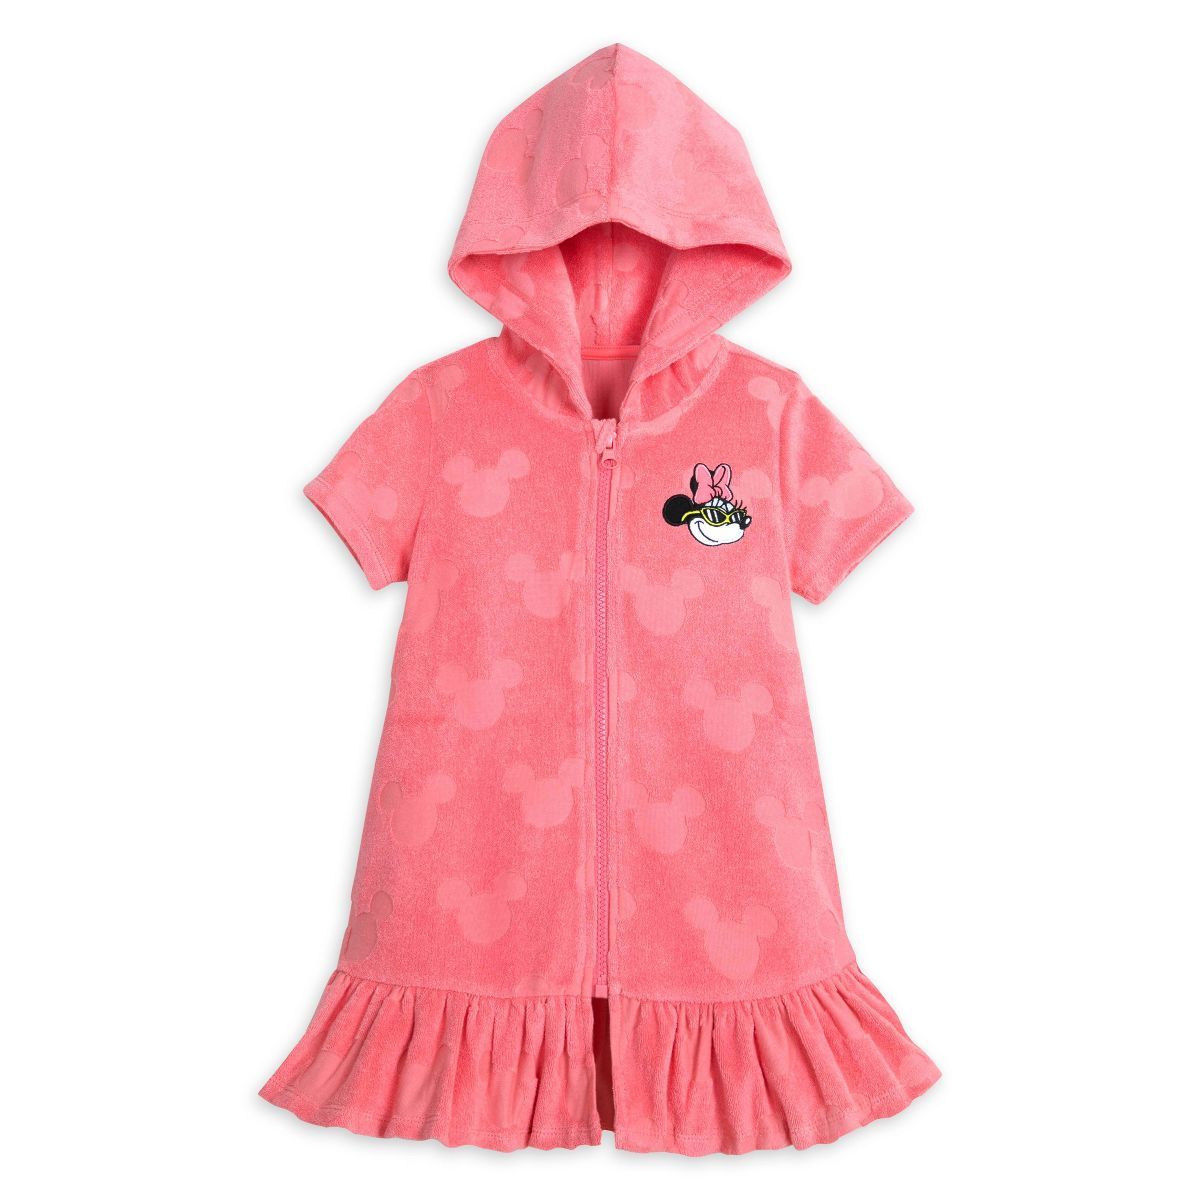 Girls' Minnie Mouse Swim Cover Up - Pink - Disney Store | Target